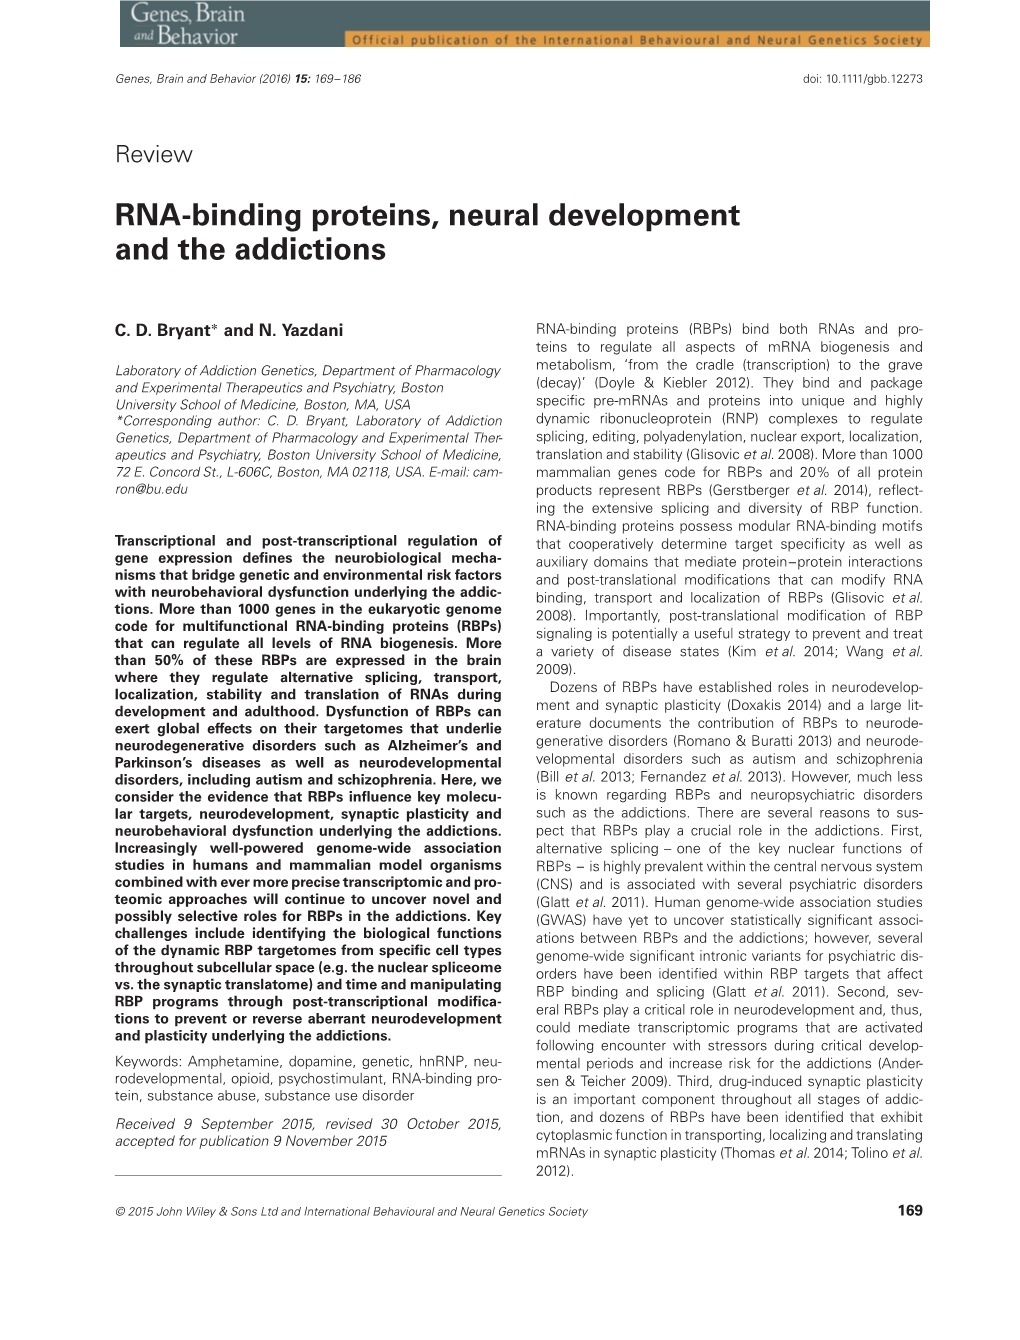 RNA-Binding Proteins, Neural Development and the Addictions